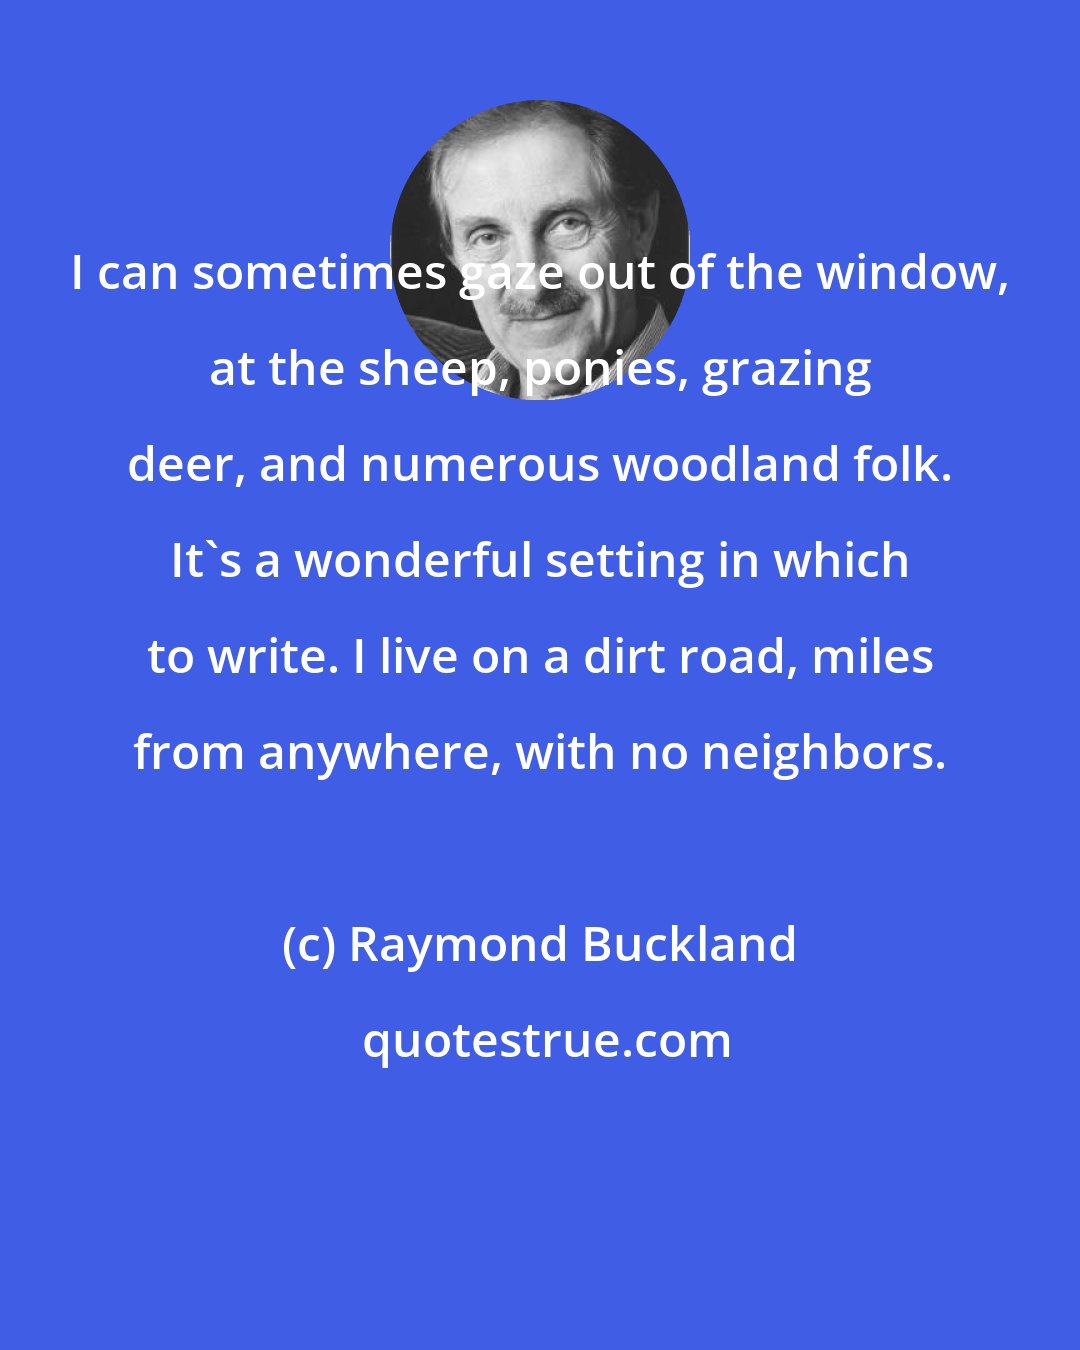 Raymond Buckland: I can sometimes gaze out of the window, at the sheep, ponies, grazing deer, and numerous woodland folk. It's a wonderful setting in which to write. I live on a dirt road, miles from anywhere, with no neighbors.